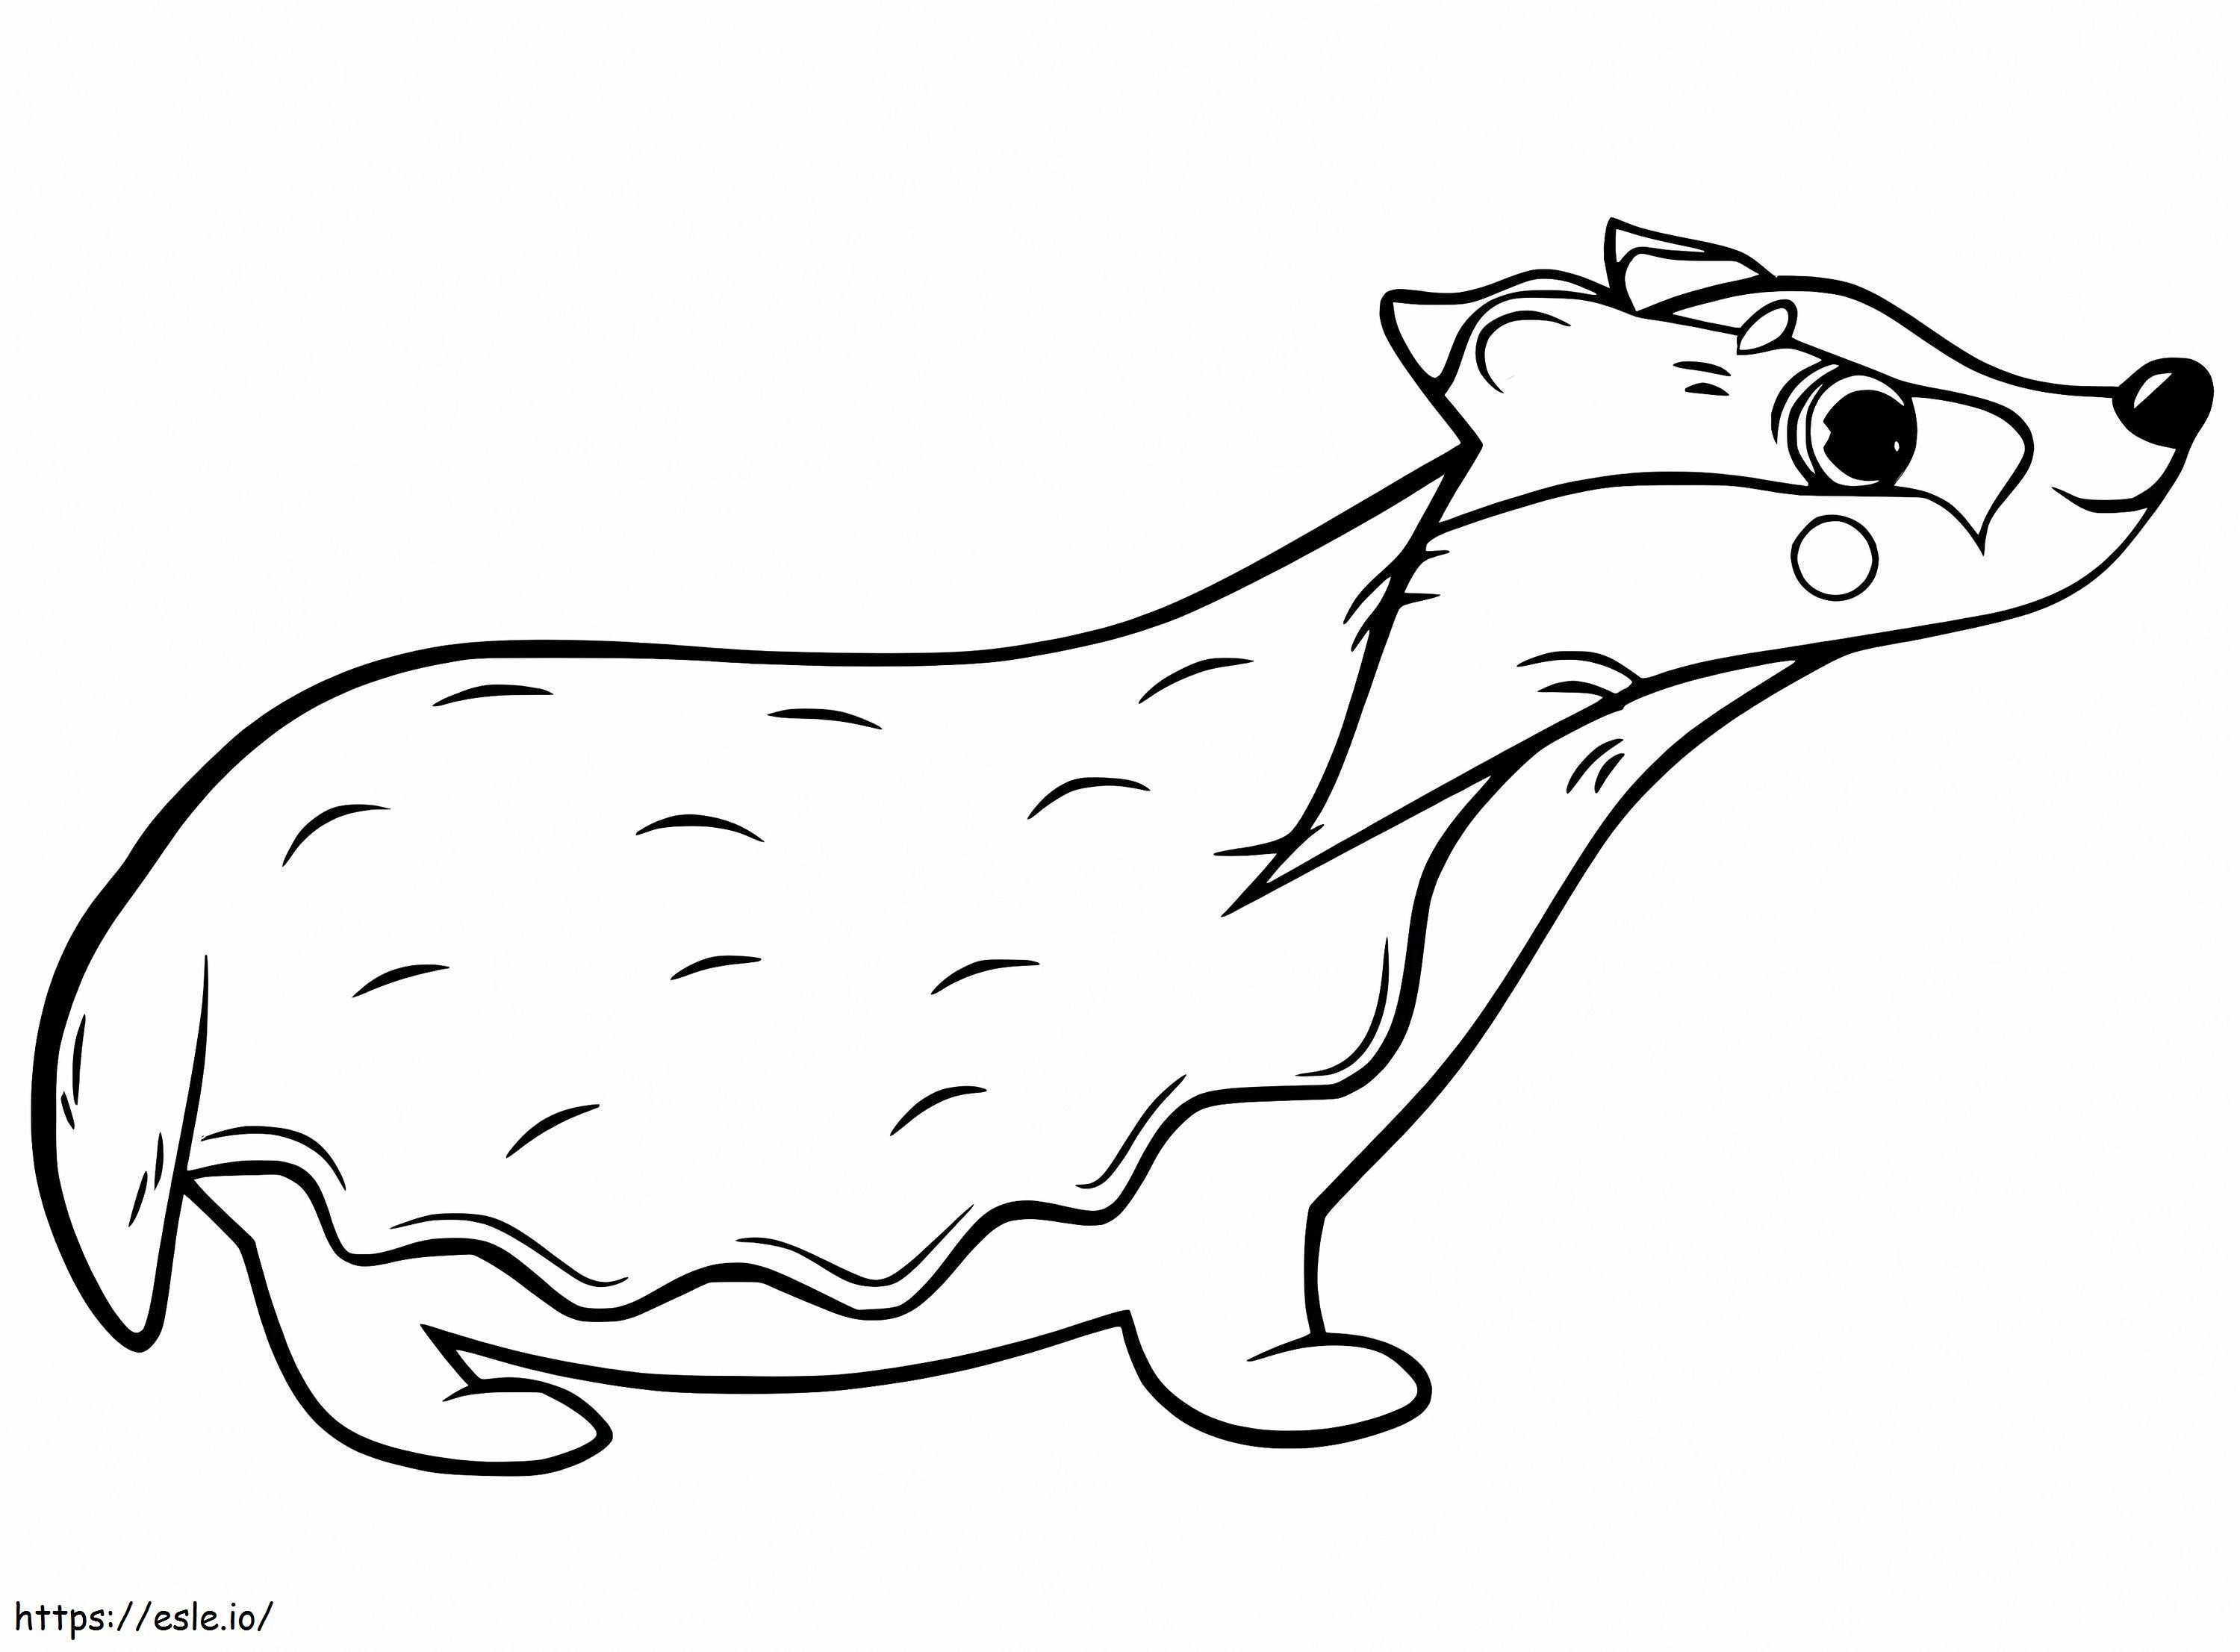 Charming Badger coloring page